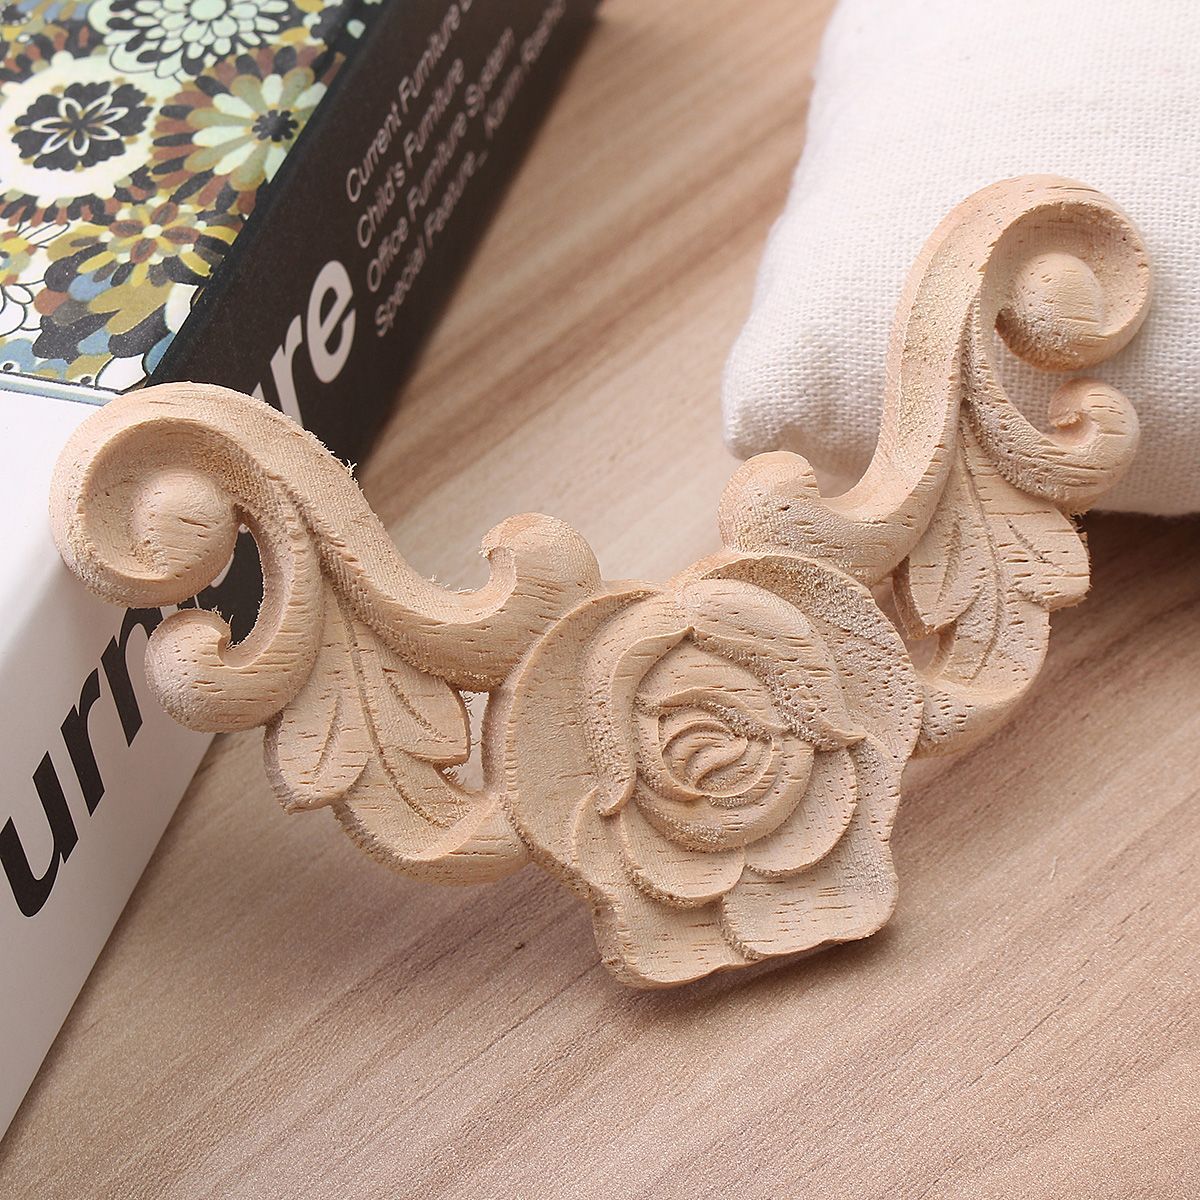 Wood-Carving-Applique-Frame-Onlay-Furniture-Decoration-Unpainted-1144100